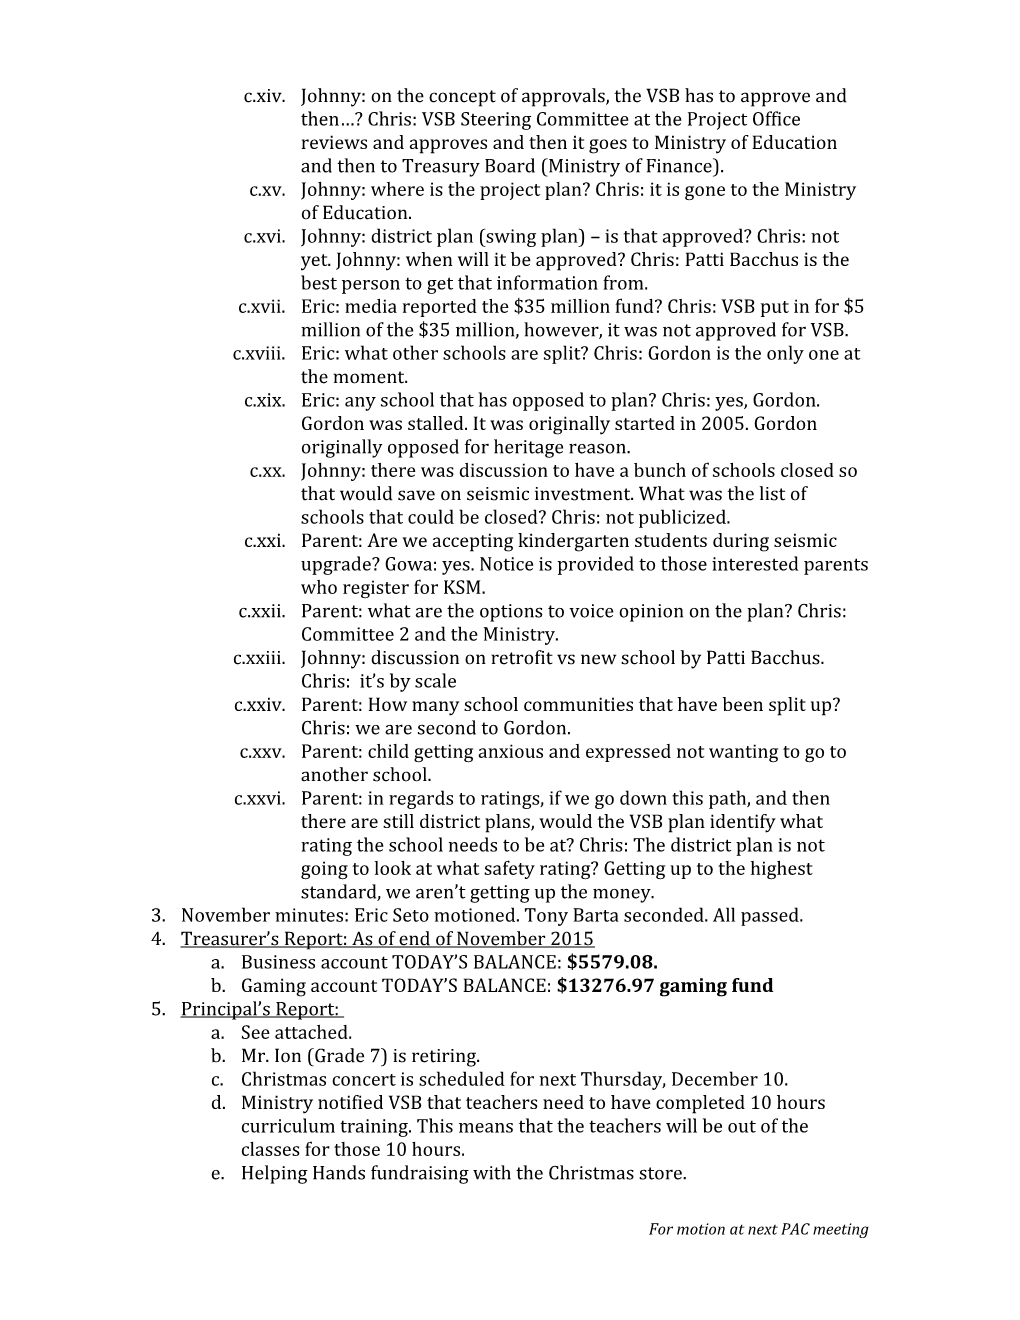 Kingsford-Smith PAC Meeting Minutes